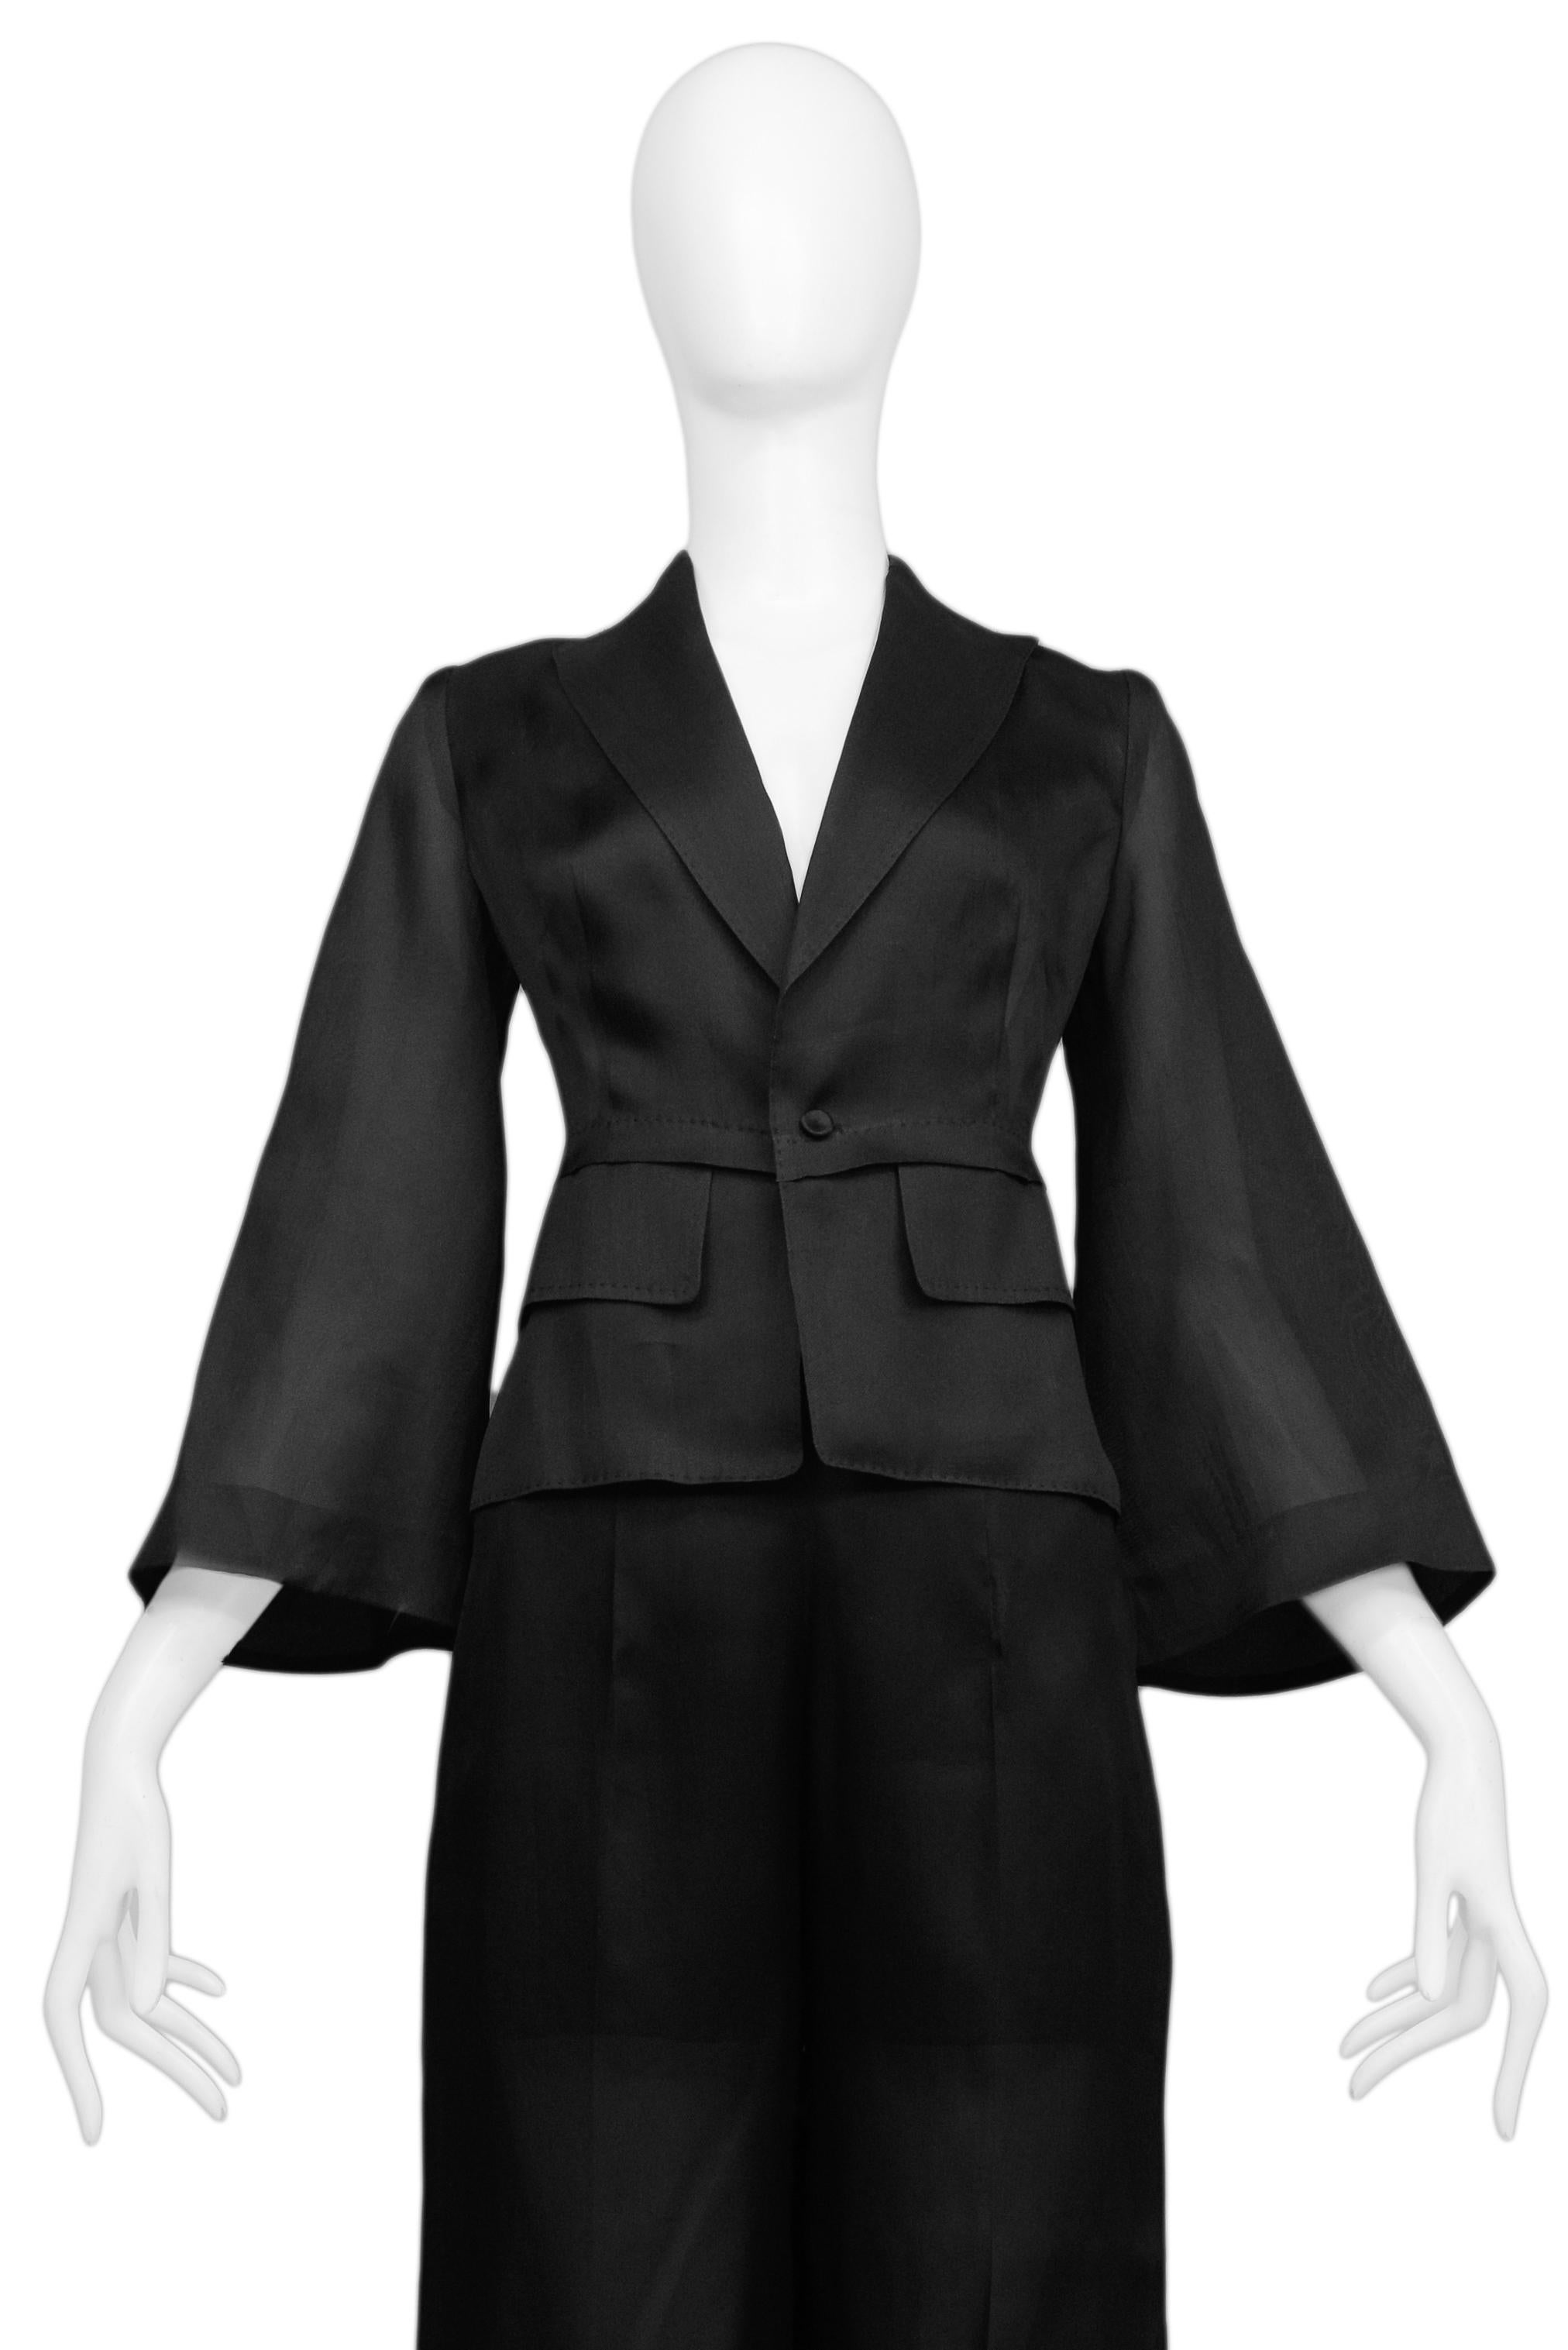 Gianfranco Ferre Black Sheer Pantsuit With Bell Sleeves In Excellent Condition For Sale In Los Angeles, CA